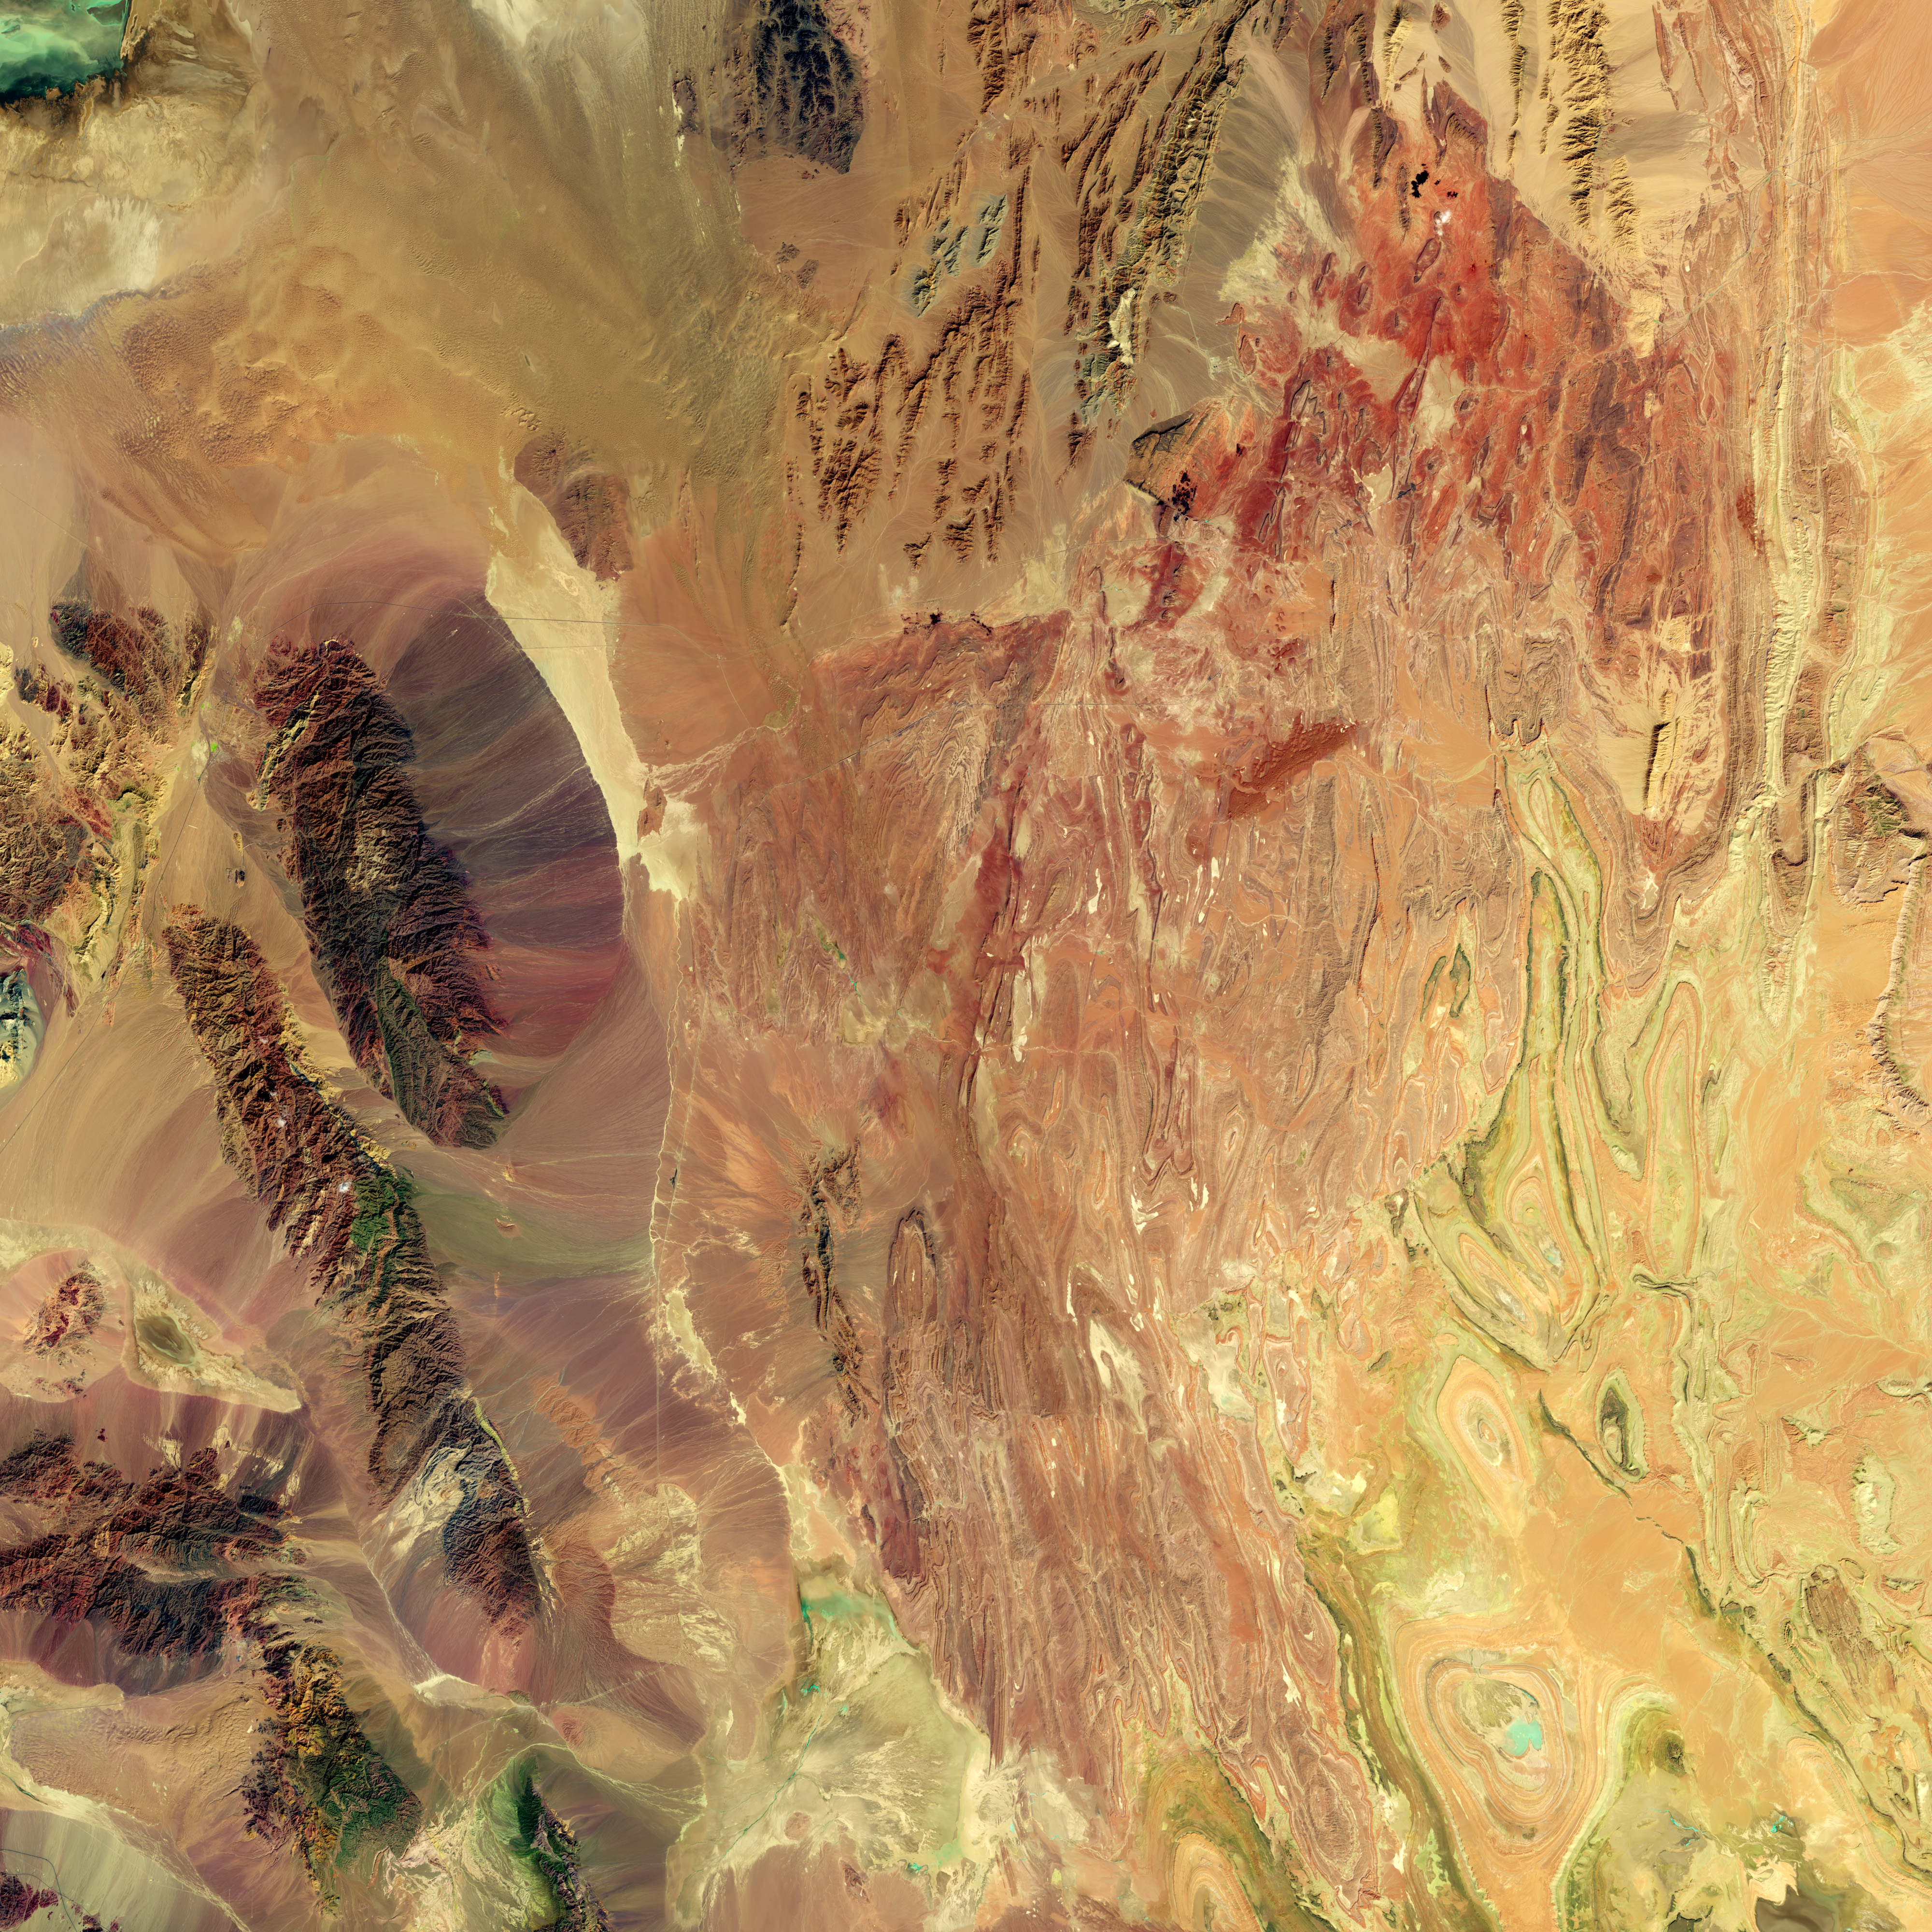 Arid Iran in False Color - related image preview